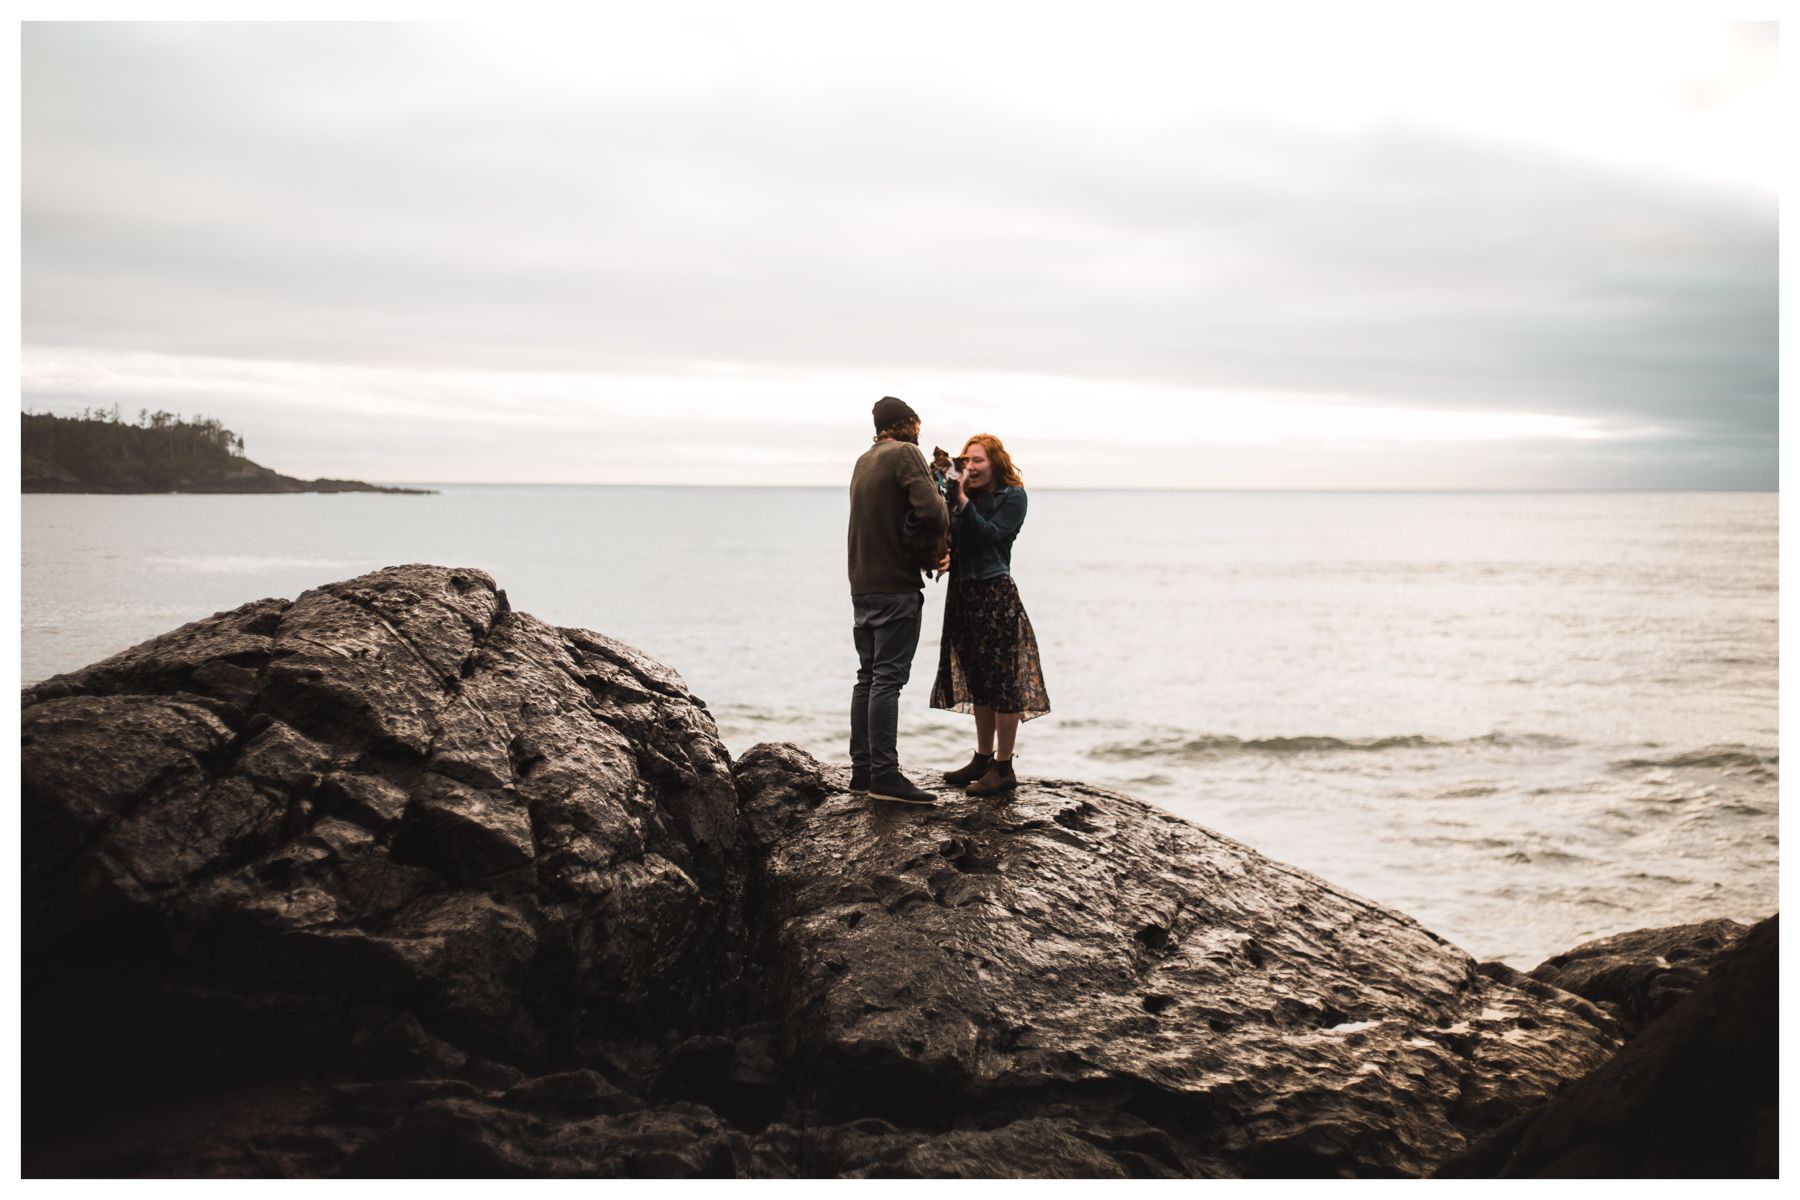 Tofino wedding photographer for a destination engagement photography session on Vancouver Island, BC - Image 7